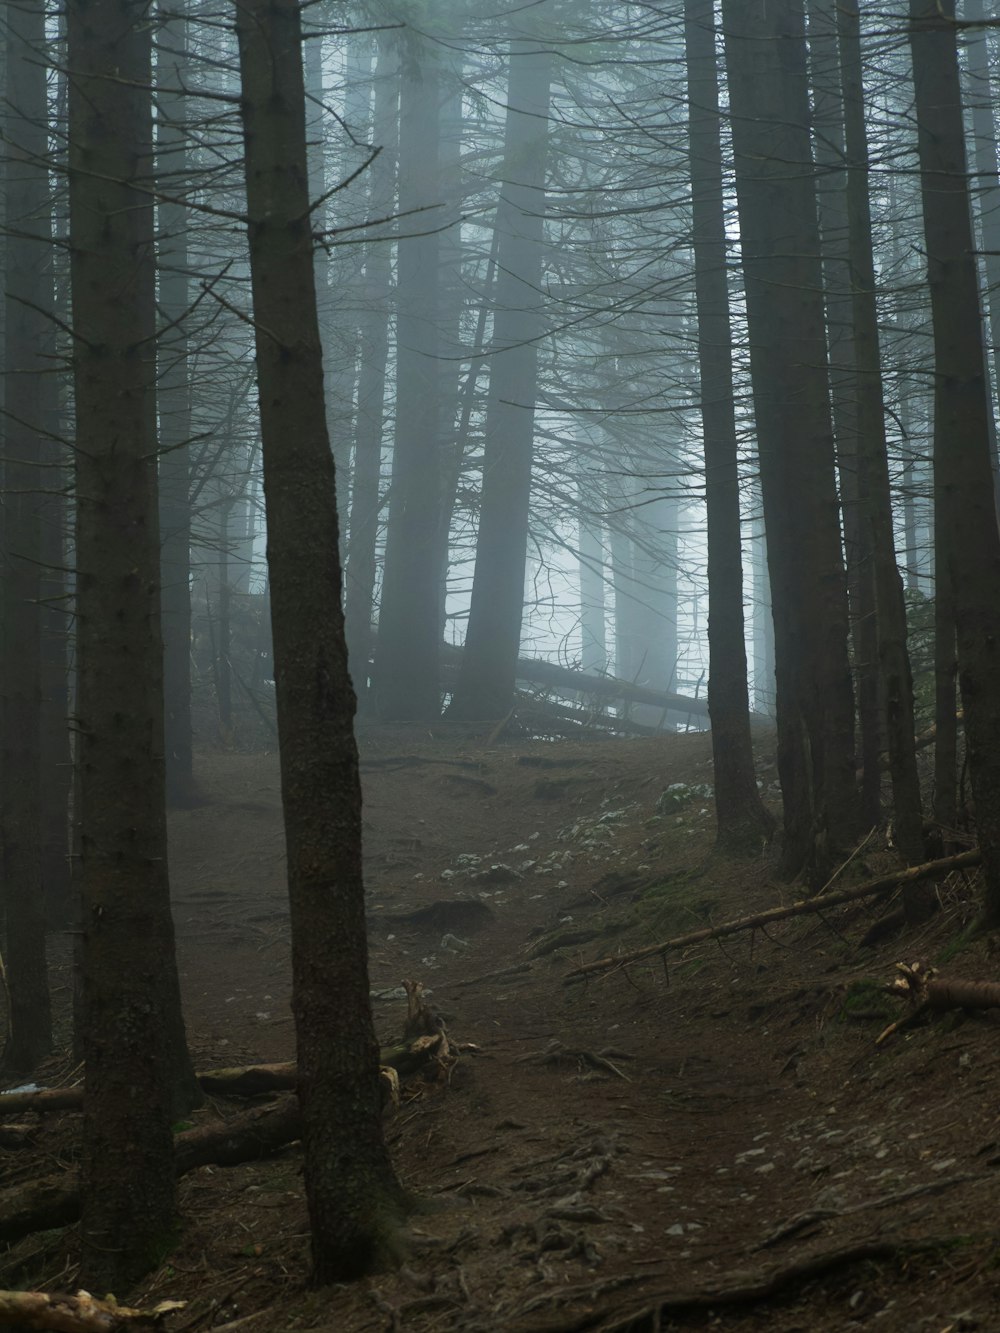 a foggy forest with a trail in the foreground